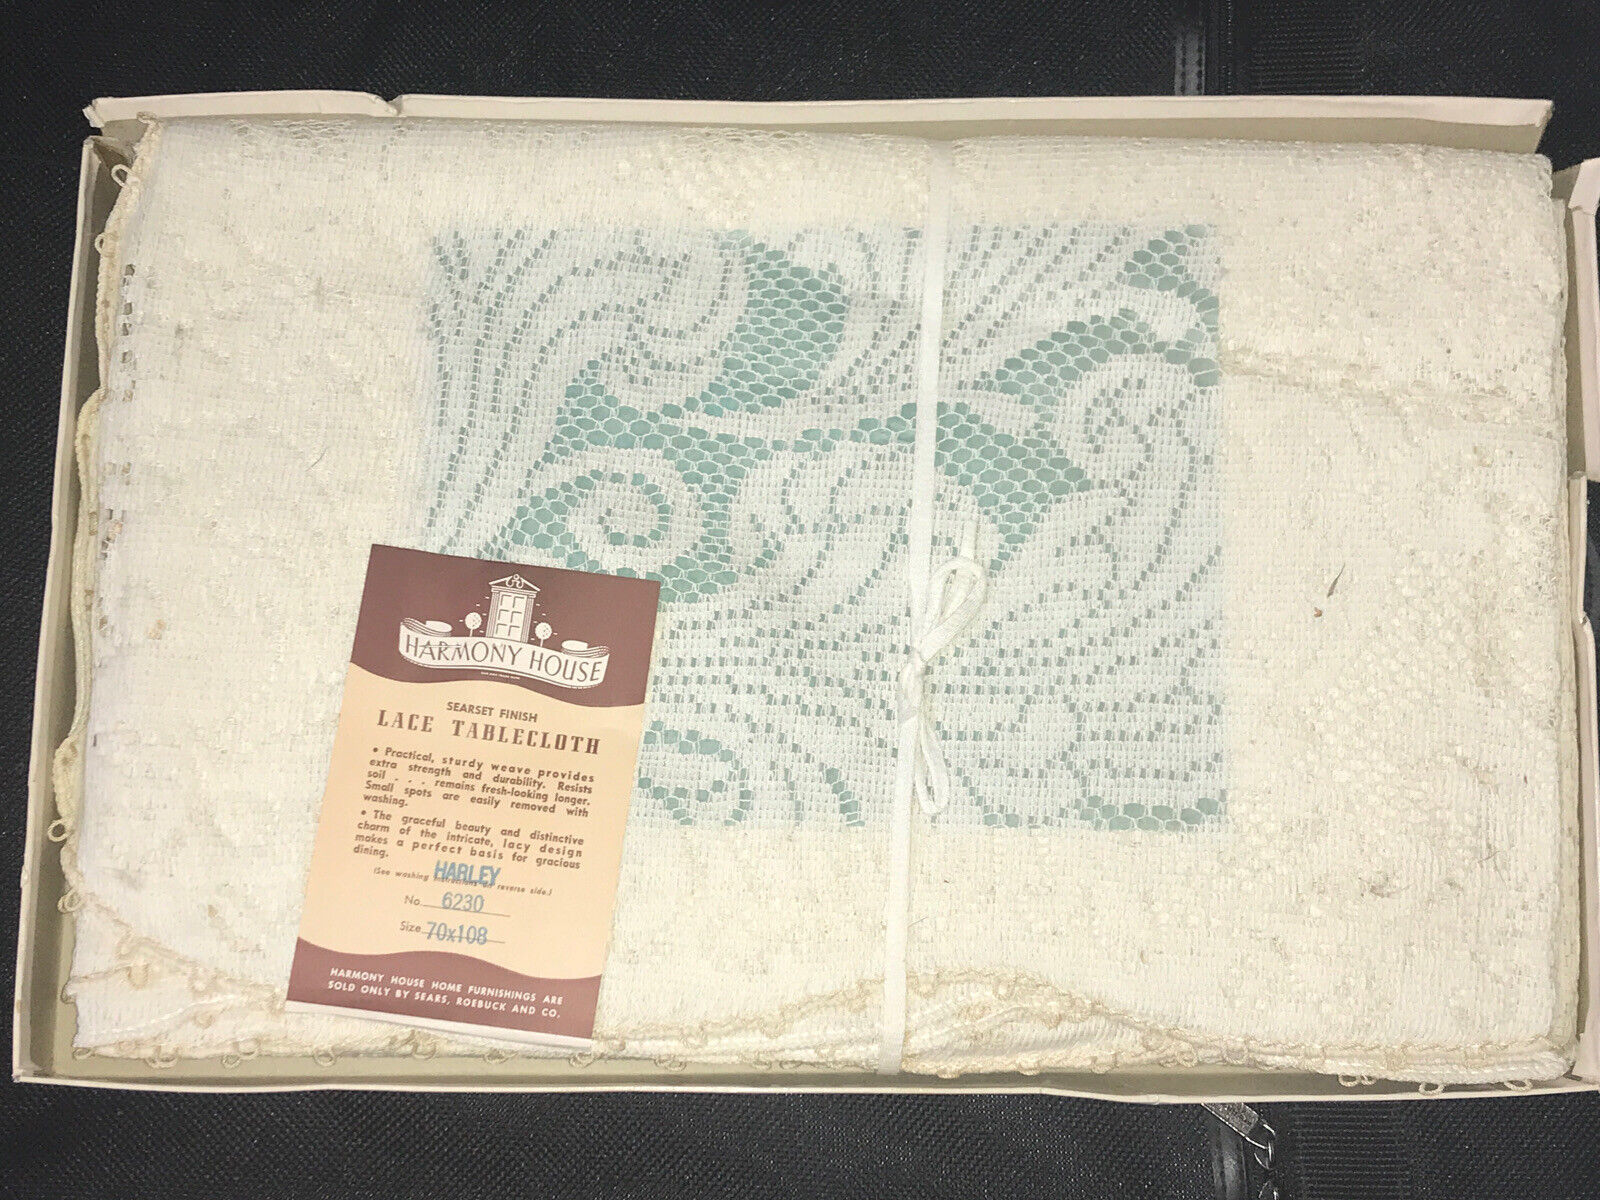 Primary image for Vintage Harmony House Cream LACE Tablecloth Sold By Sears w/ Tags NEW 70 x 108